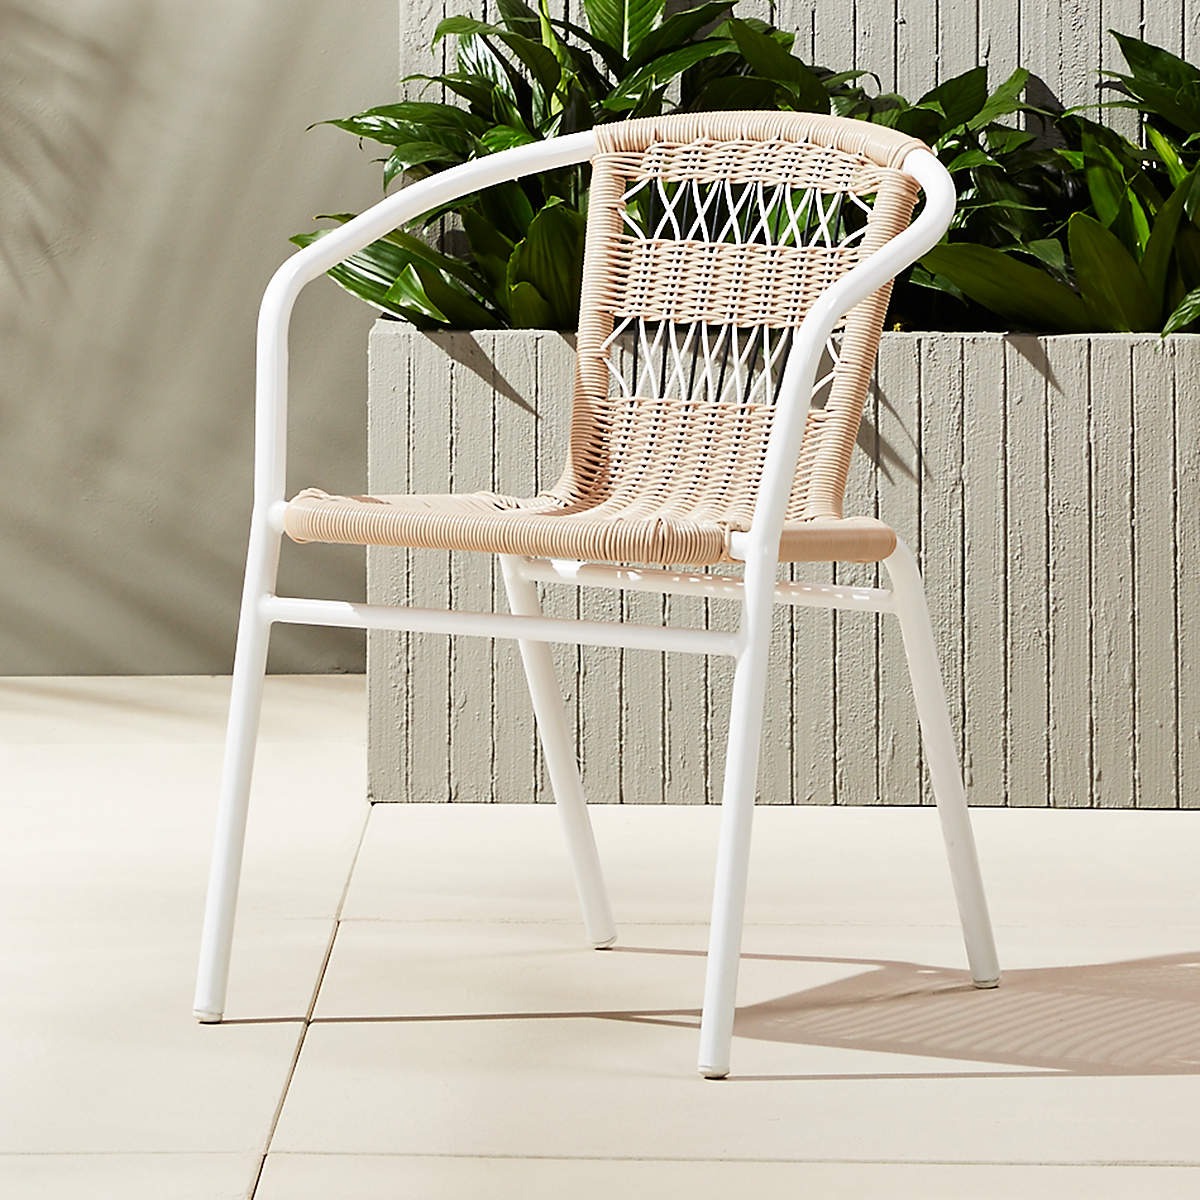 The Best Outdoor Furniture Brand CB2